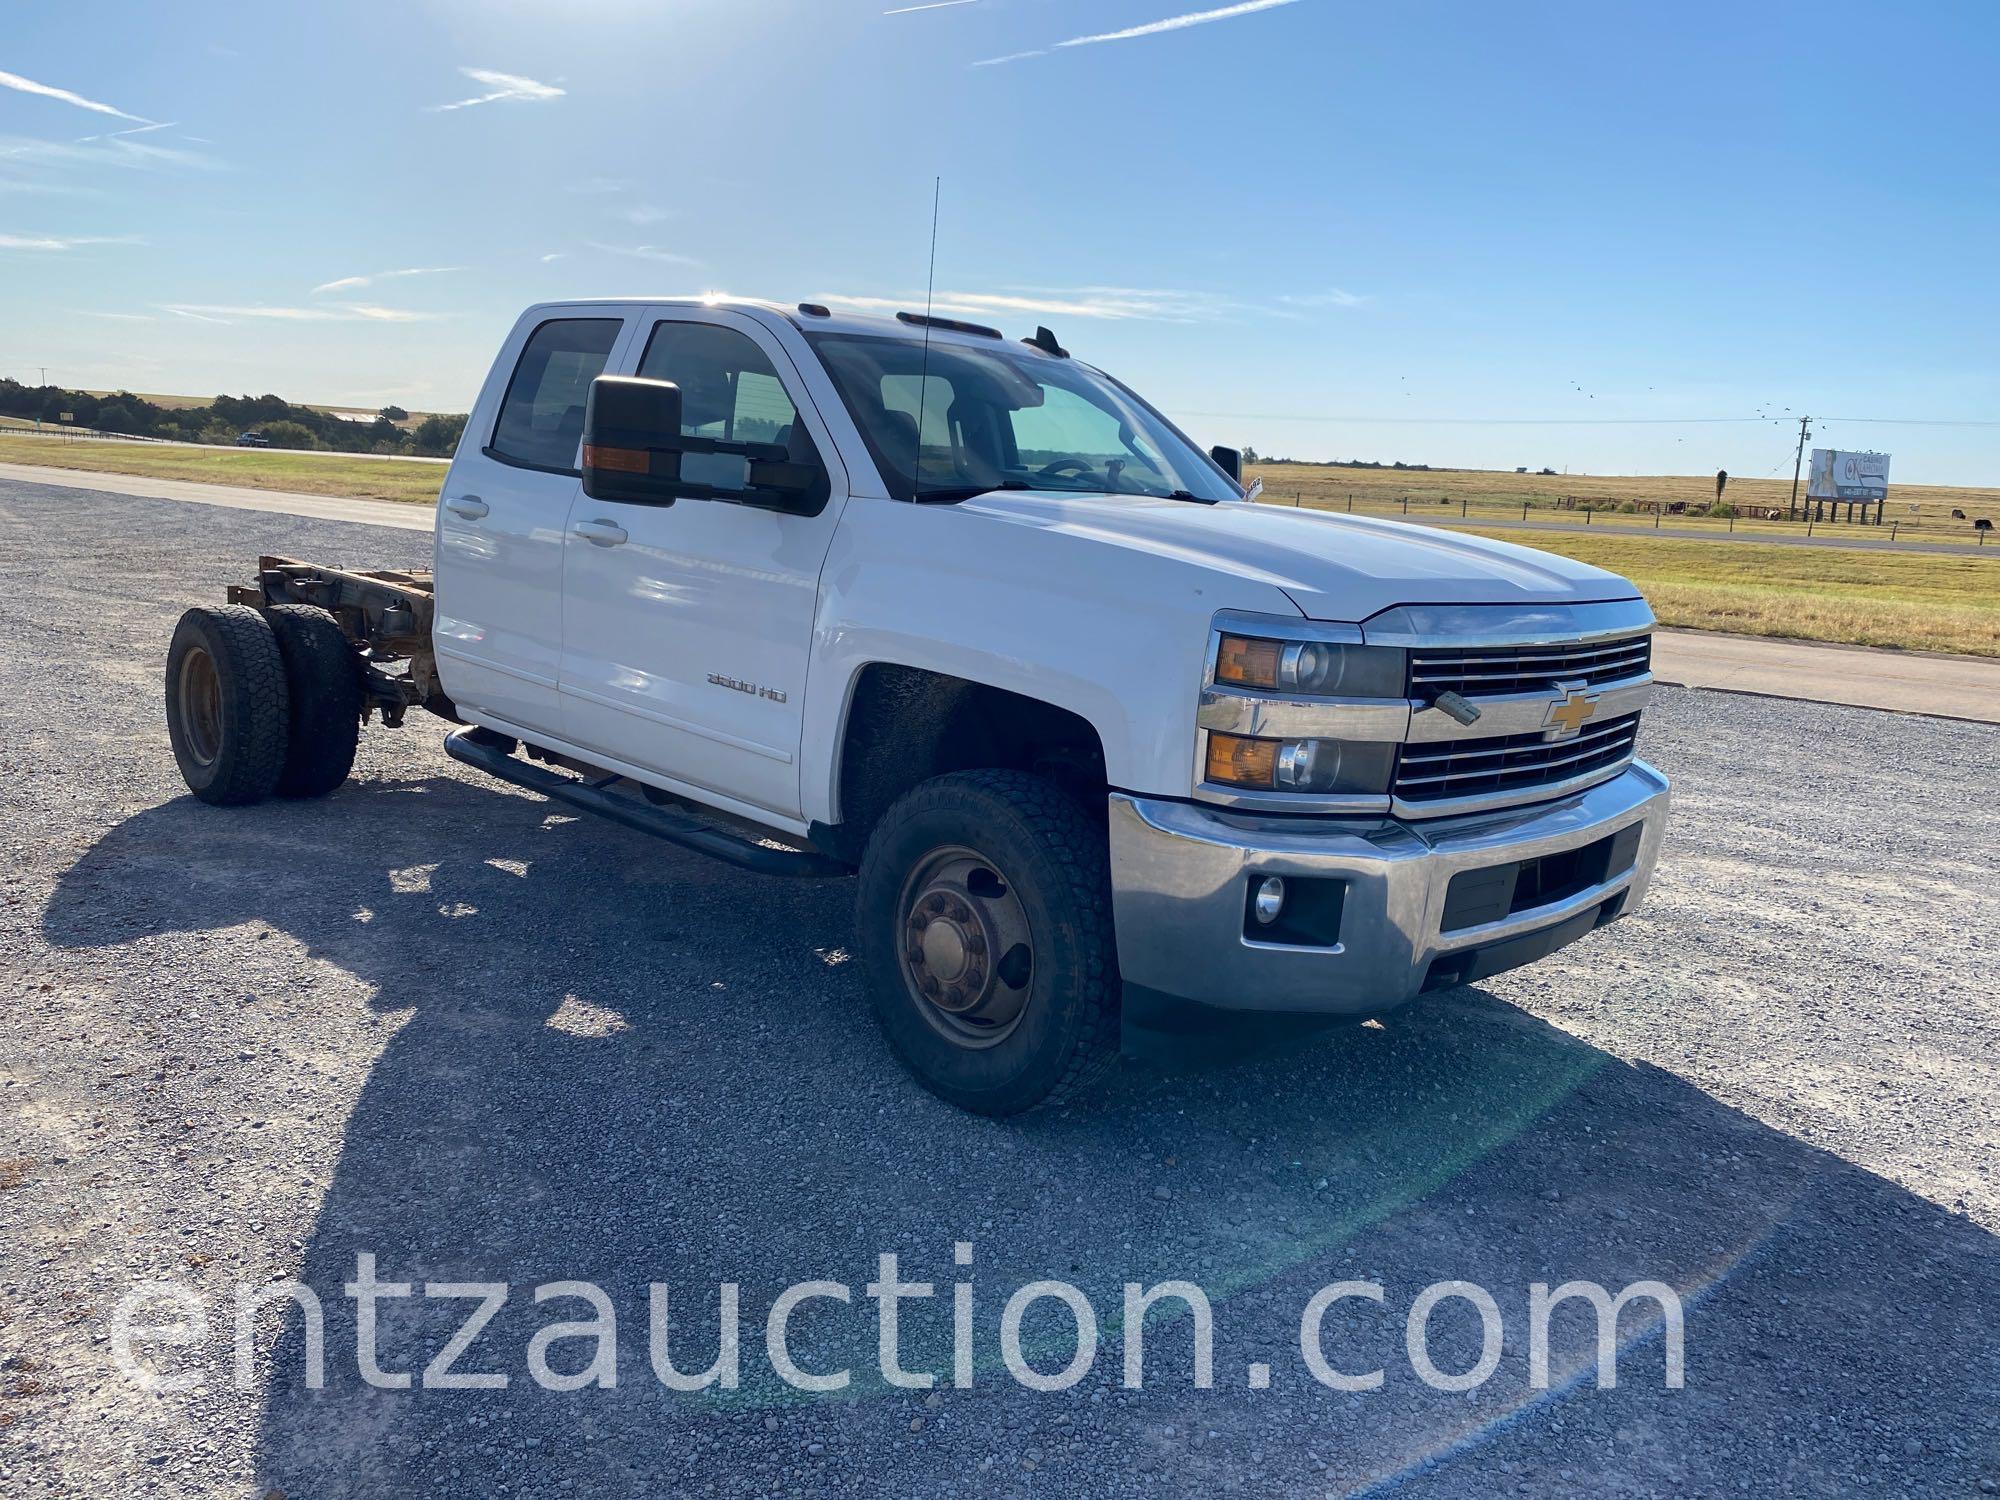 2015 CHEVY 3500 HD CAB & CHASSIS, 6.0L, 4X4, GAS,